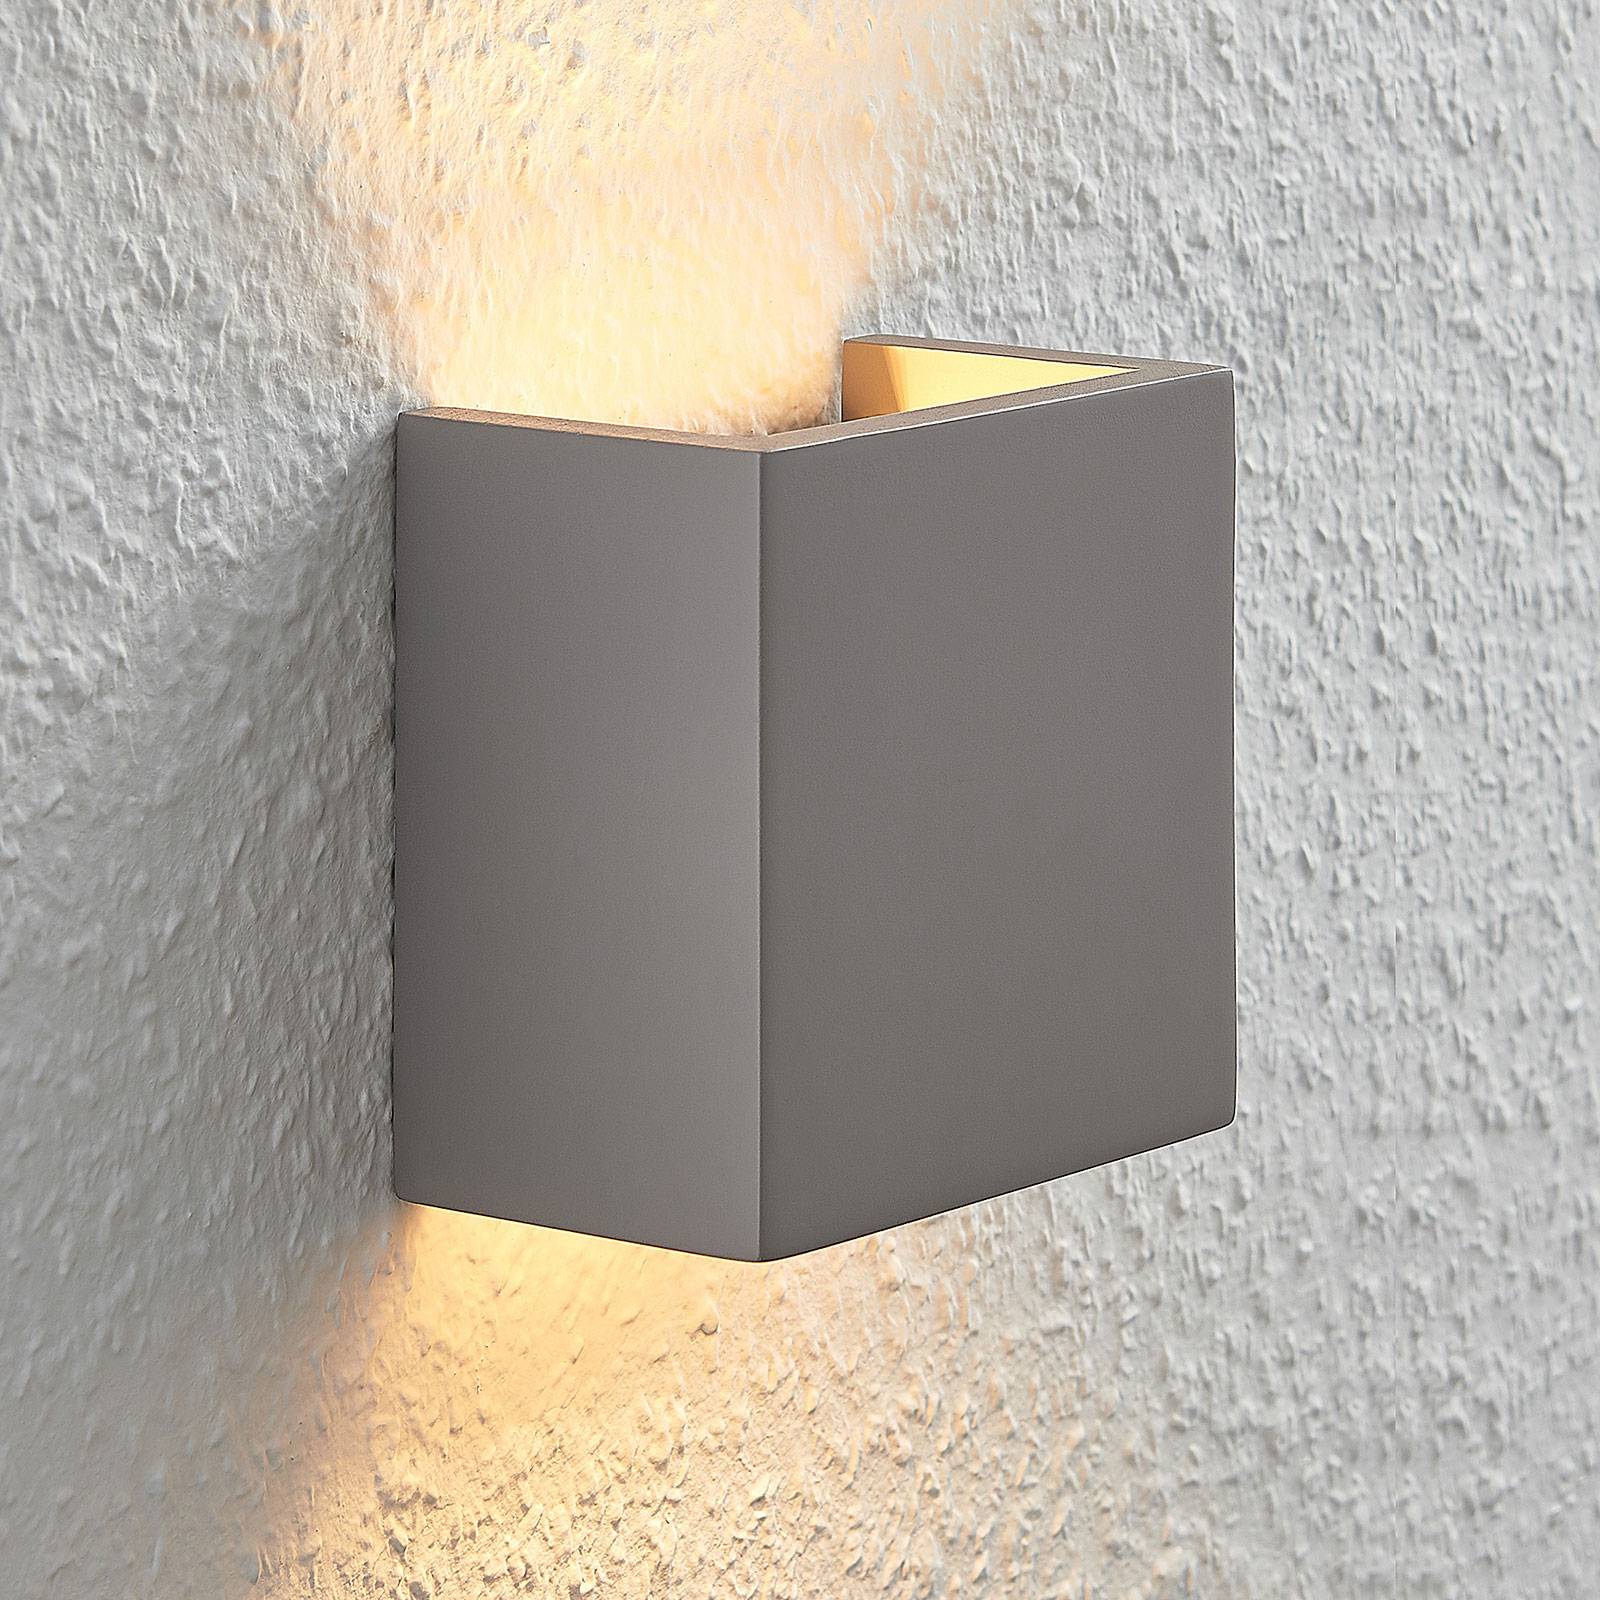 Photos - Chandelier / Lamp Lindby Smira concrete wall lamp in grey, 12.5 x 12.5 cm 